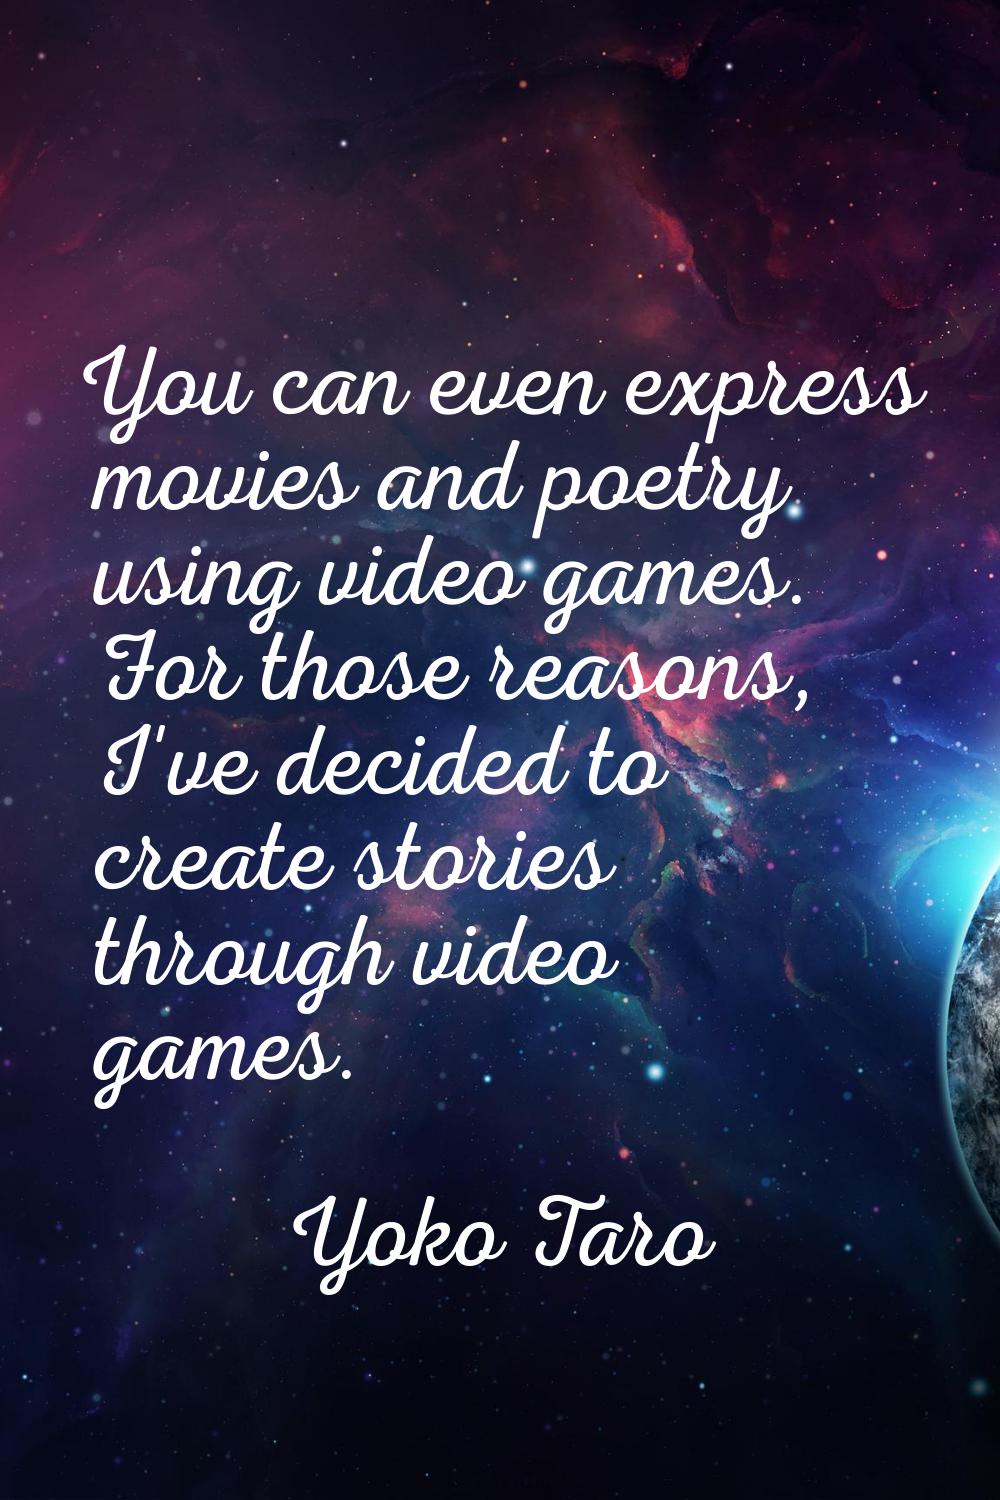 You can even express movies and poetry using video games. For those reasons, I've decided to create